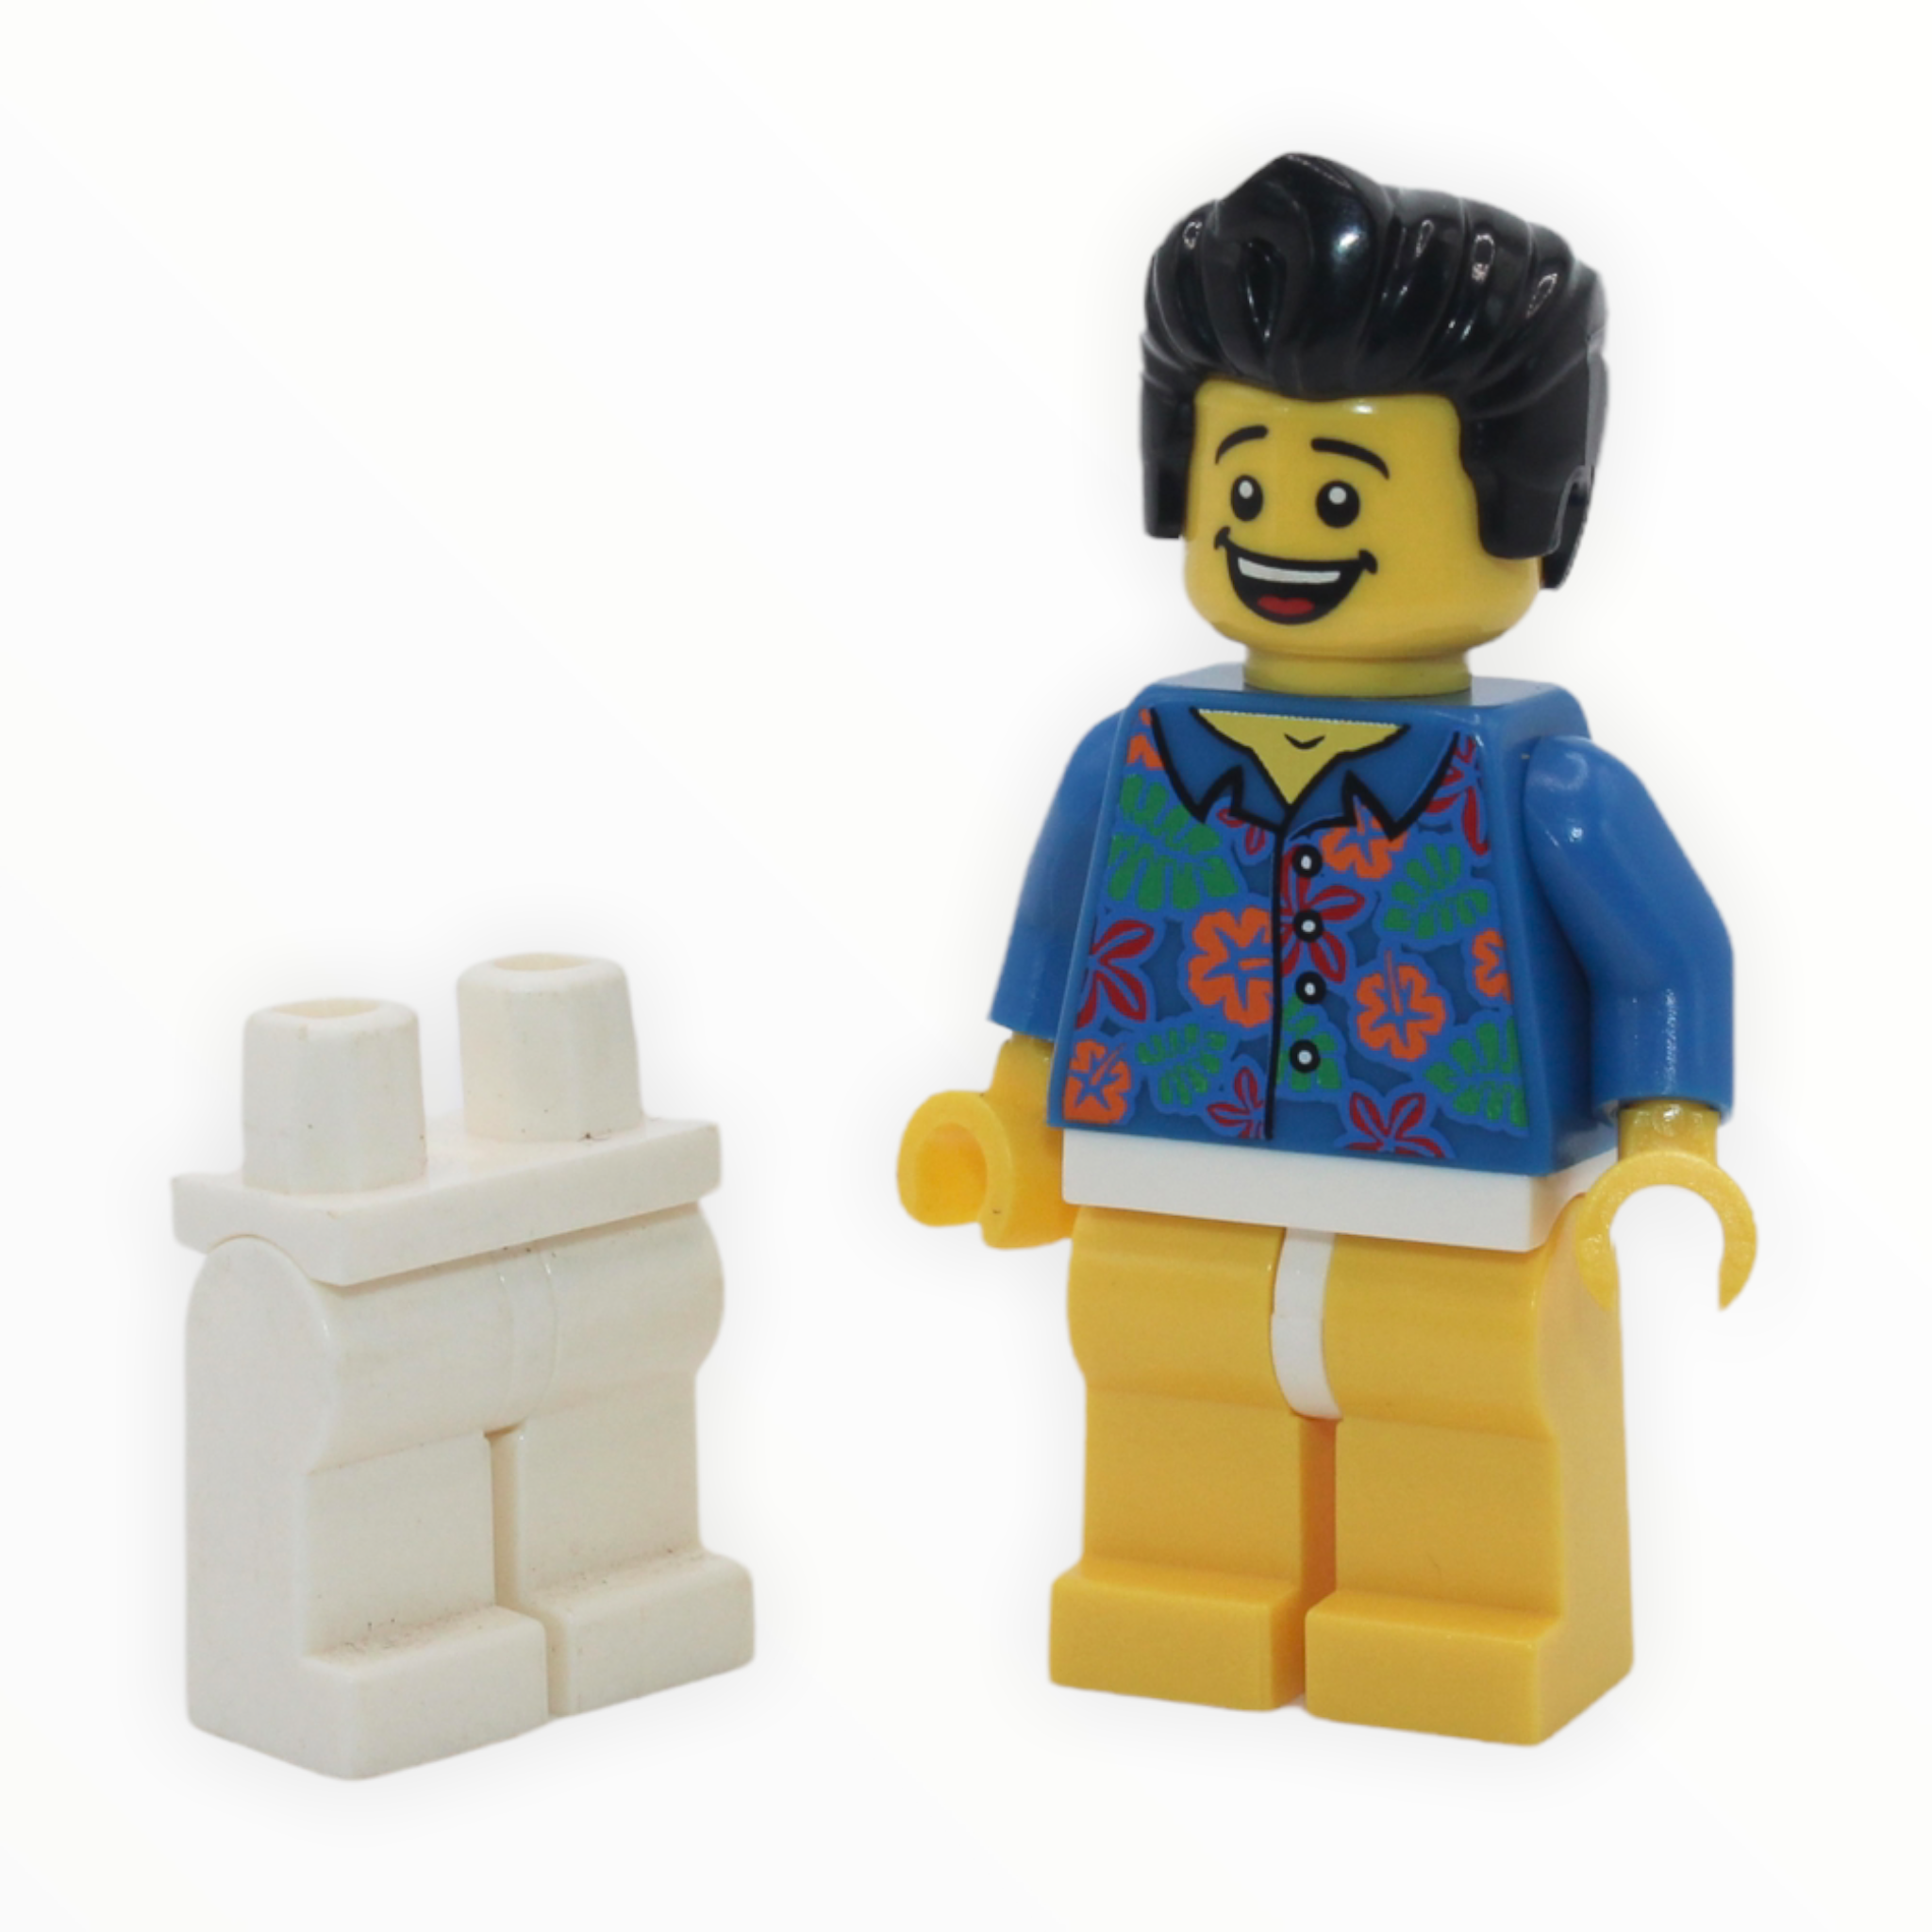 LEGO Movie Series: “Where are my Pants?” Guy